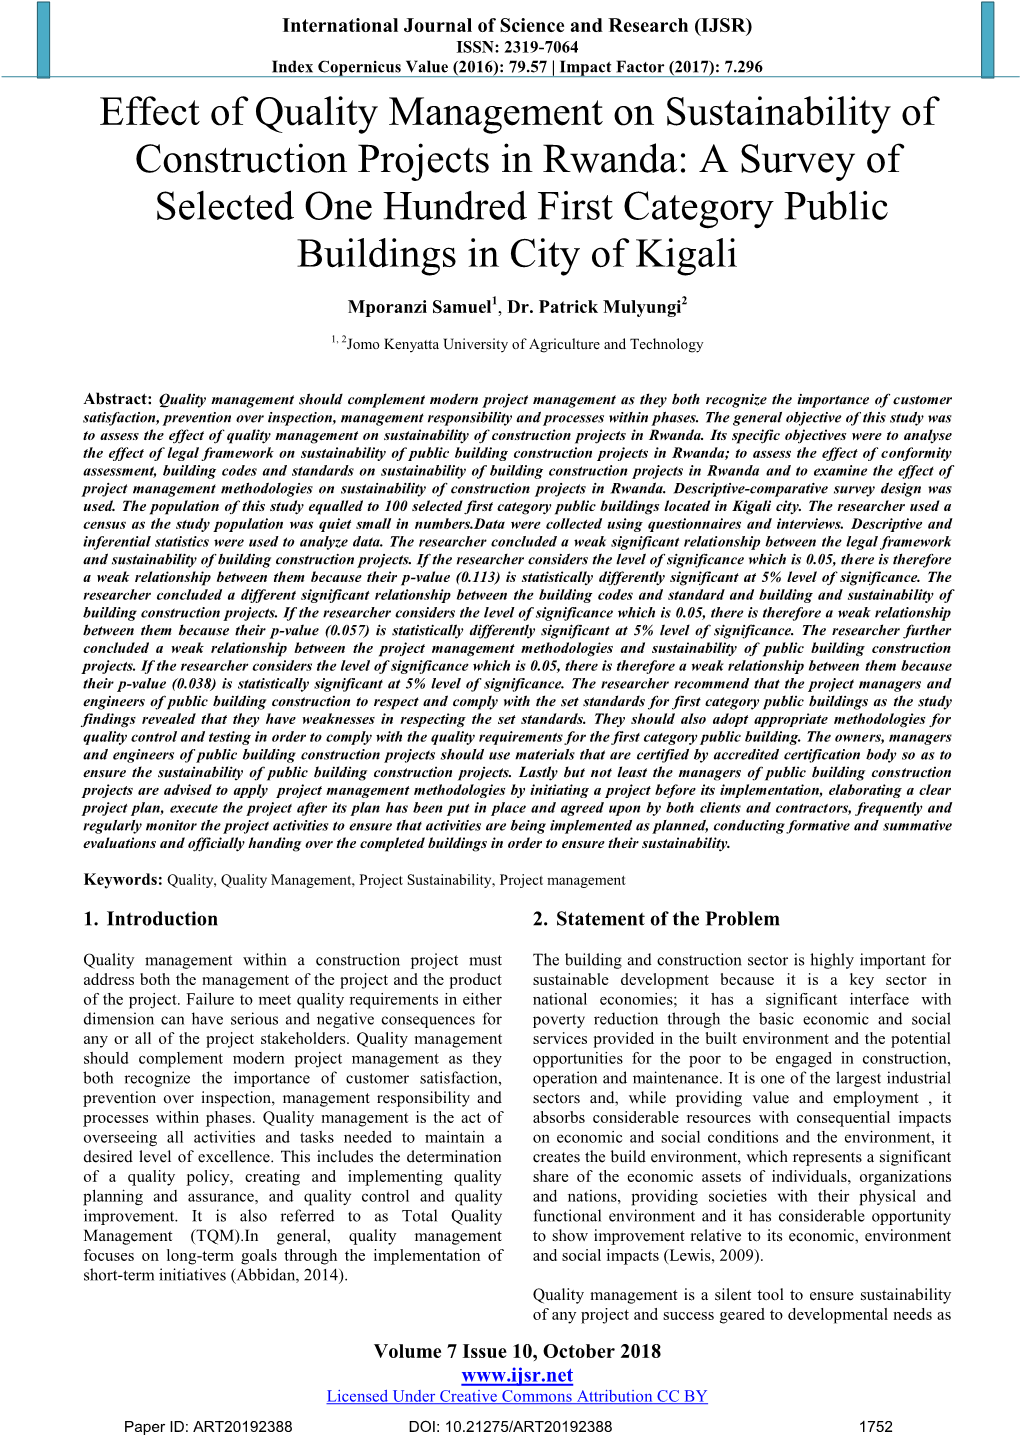 Effect of Quality Management on Sustainability of Construction Projects in Rwanda: a Survey of Selected One Hundred First Category Public Buildings in City of Kigali